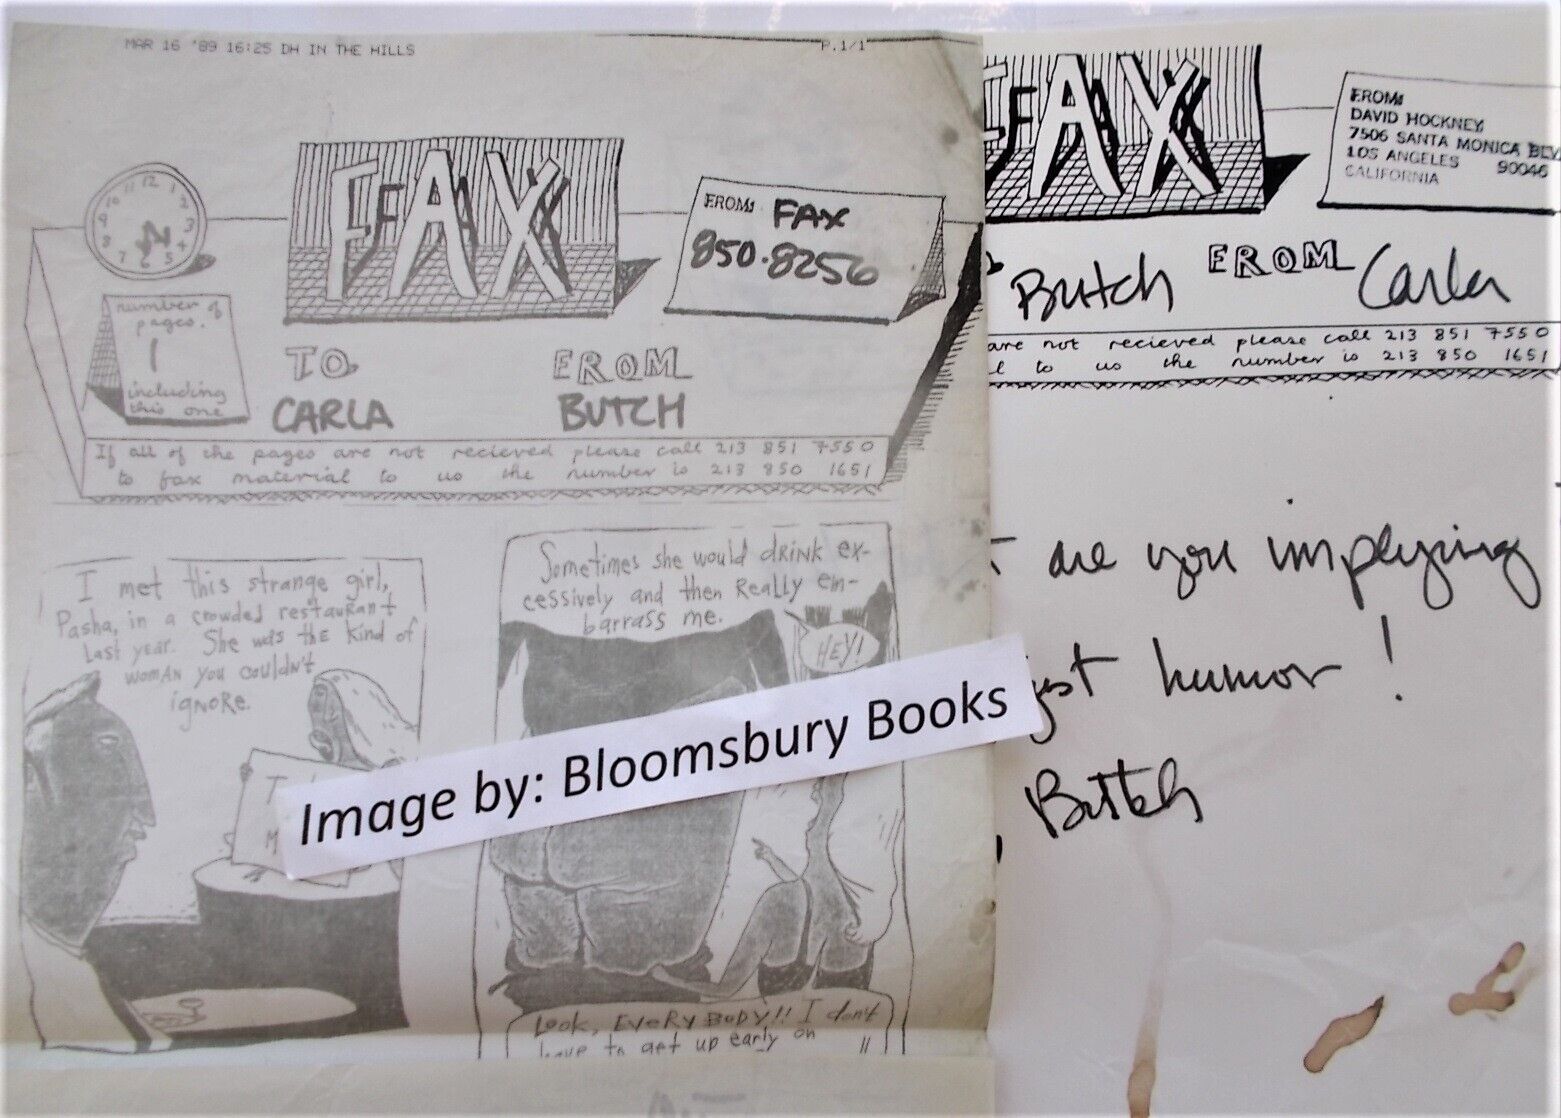 Two Orig Faxes 1989 David Hockney Home & Office Buddy Hickerson Art Butch Kirby